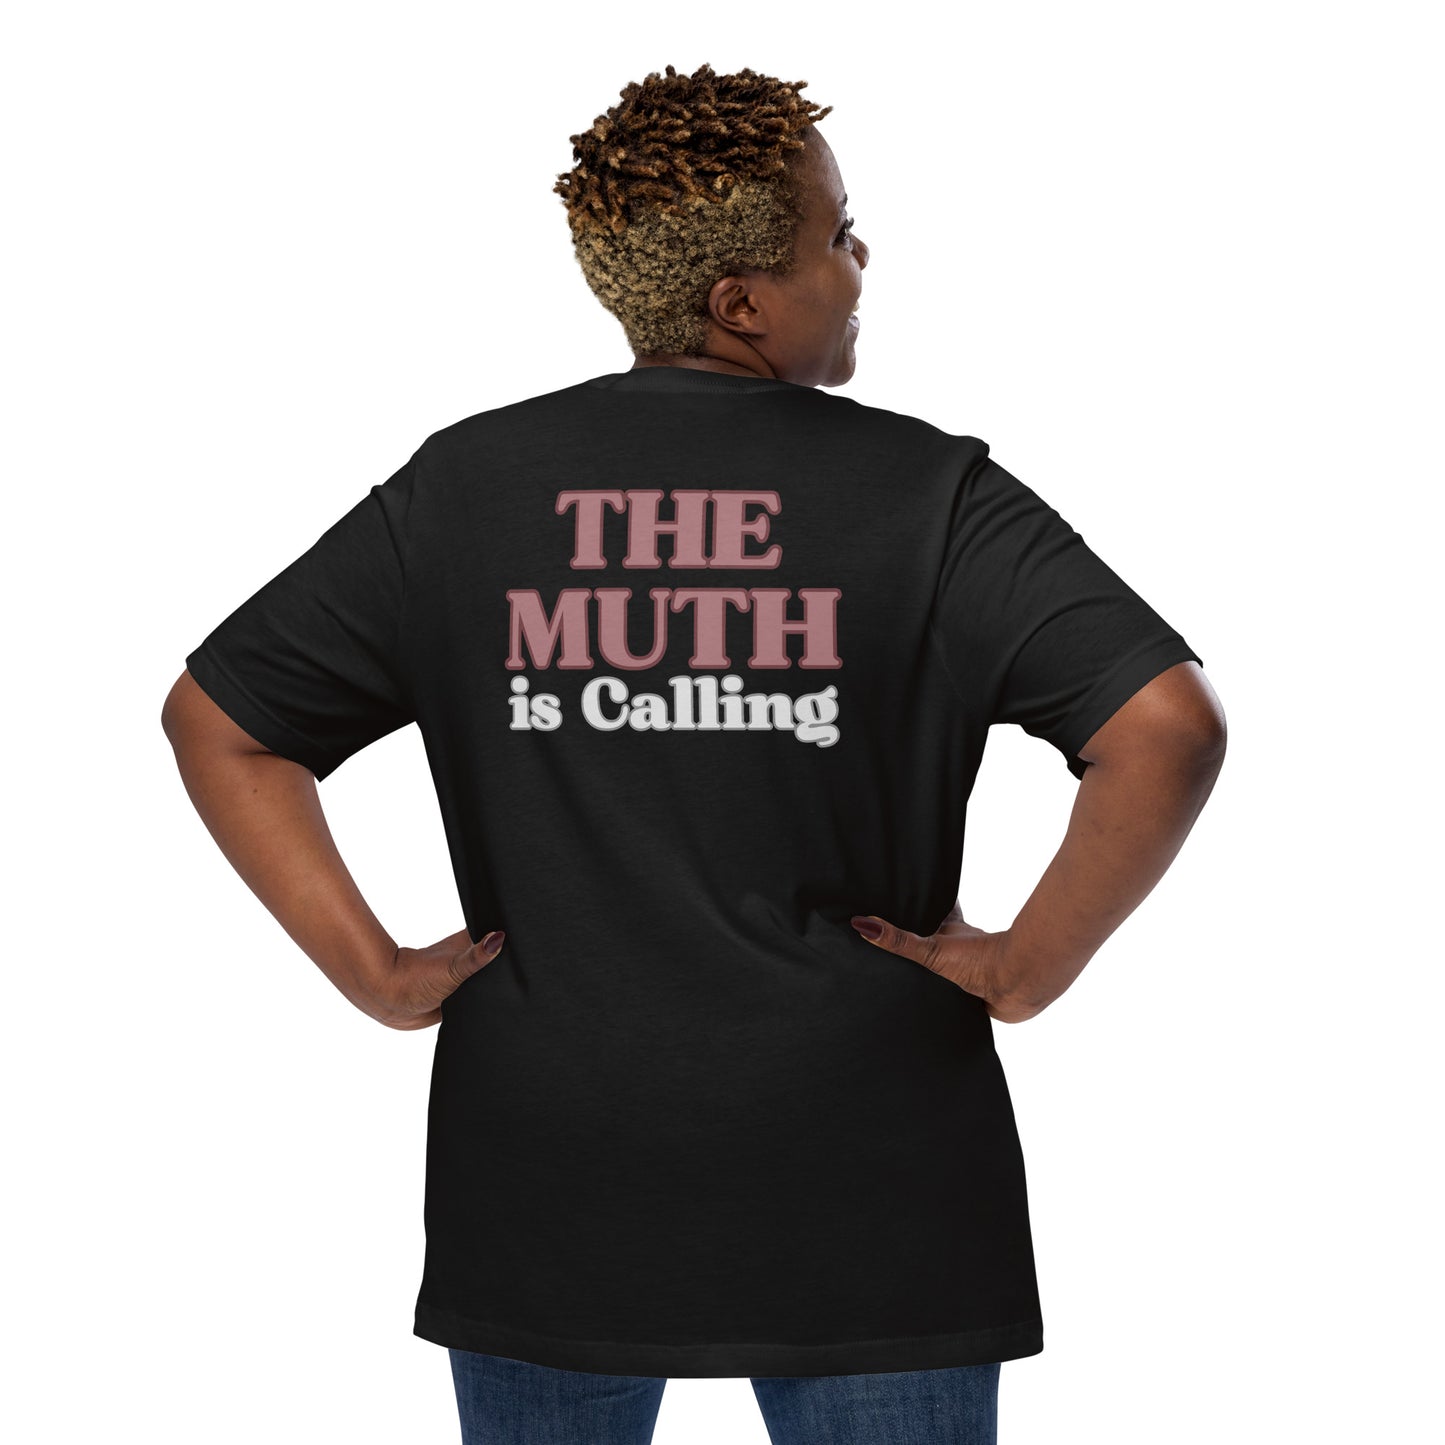 The MUTH is calling! Unisex t-shirt